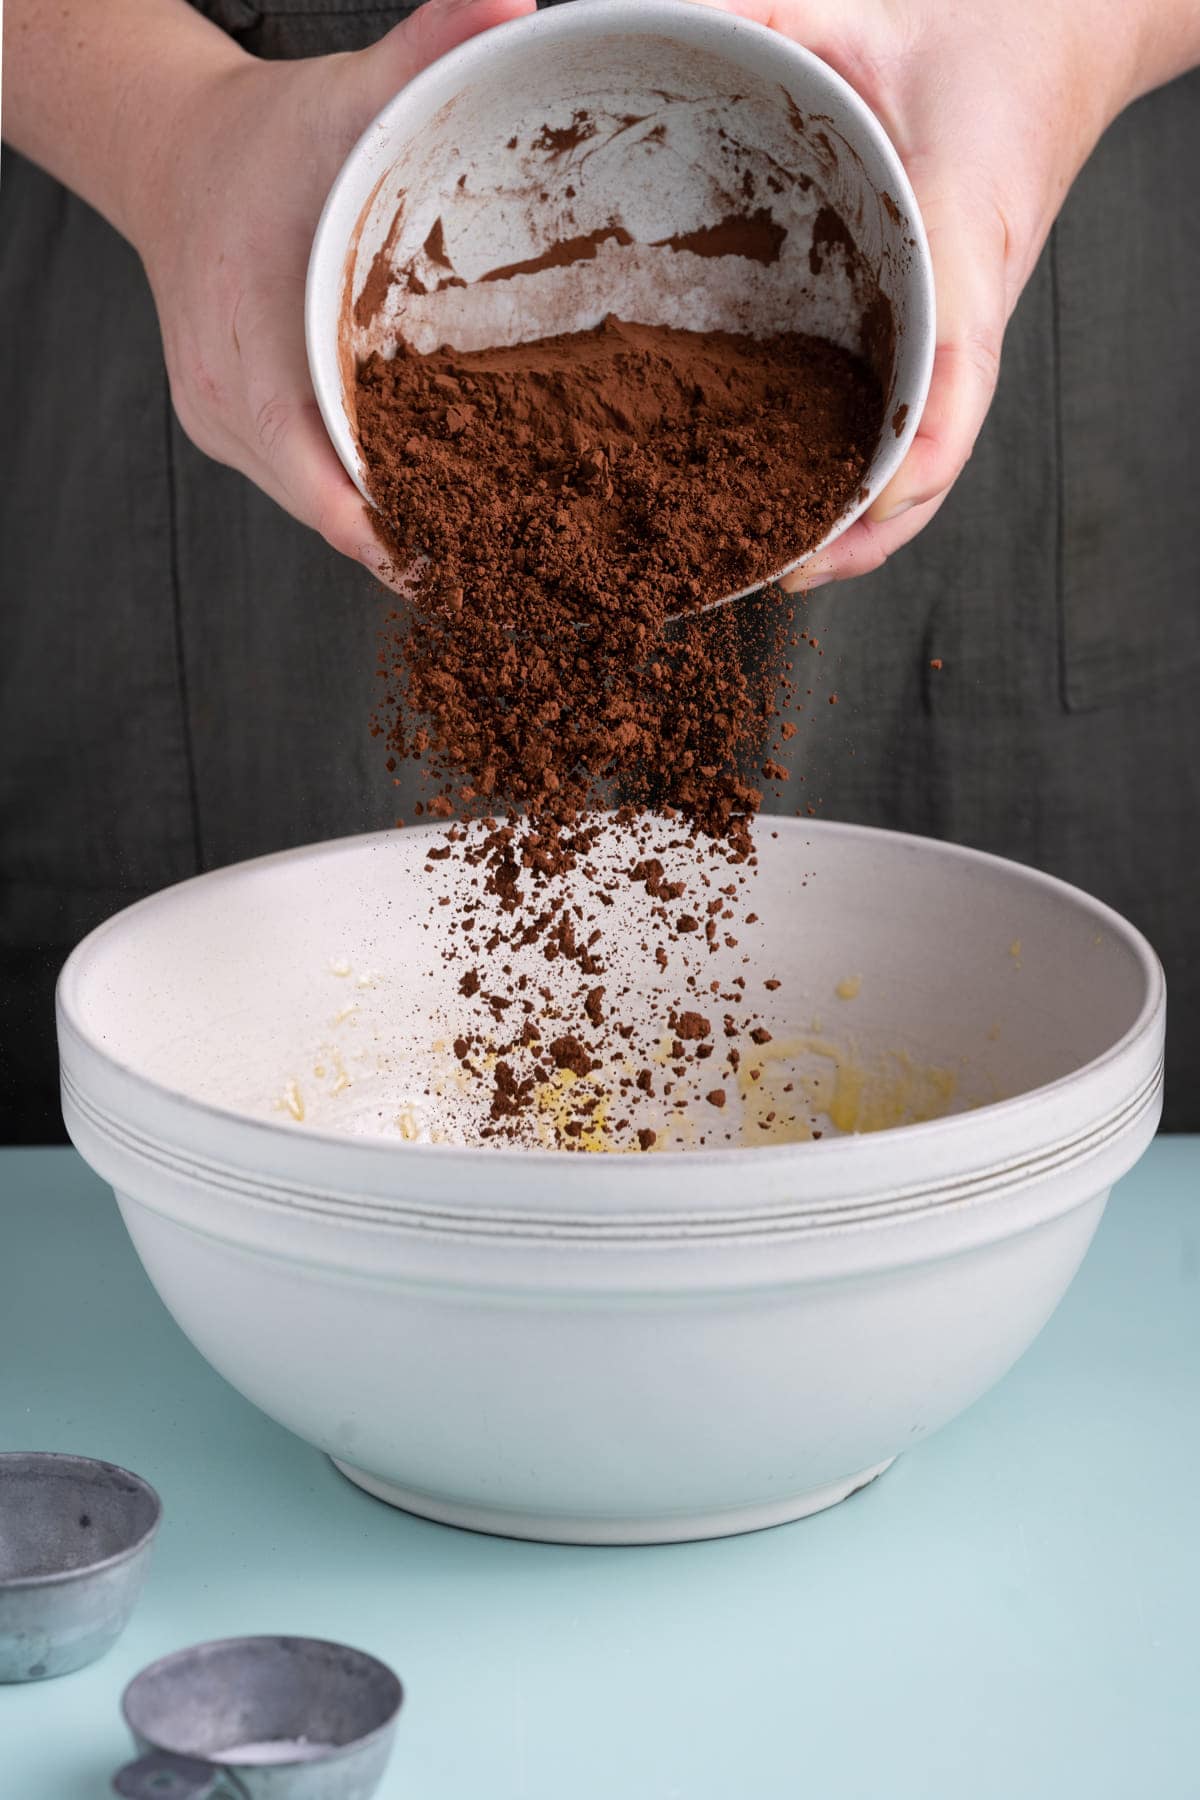 Adding cocoa powder to olive oil brownie mix